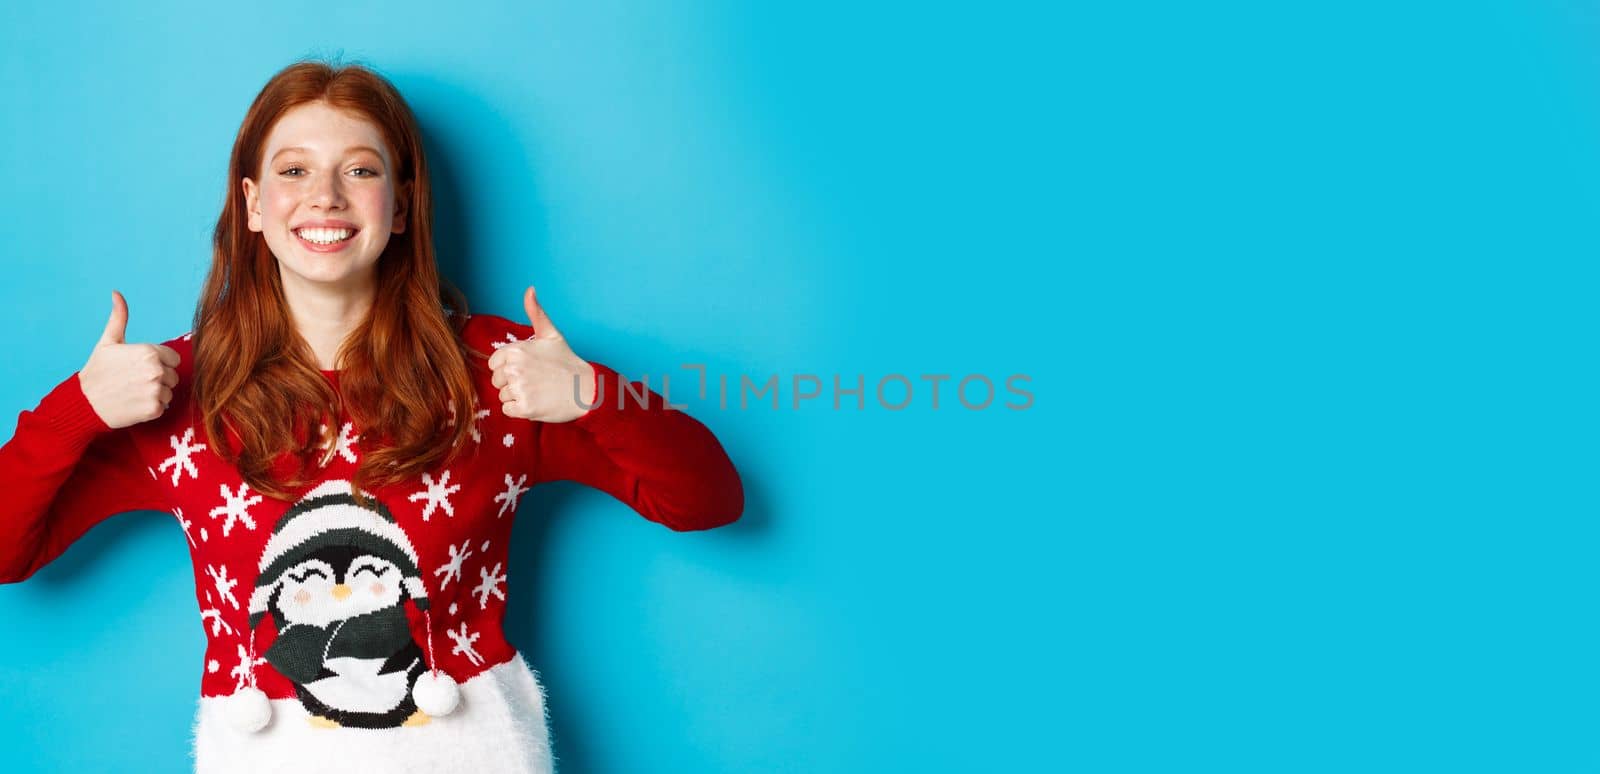 Winter holidays and Christmas Eve concept. Happy smiling girl with red hair, showing thumbs up in approval, praise good product, recommending, standing in xmas sweater.